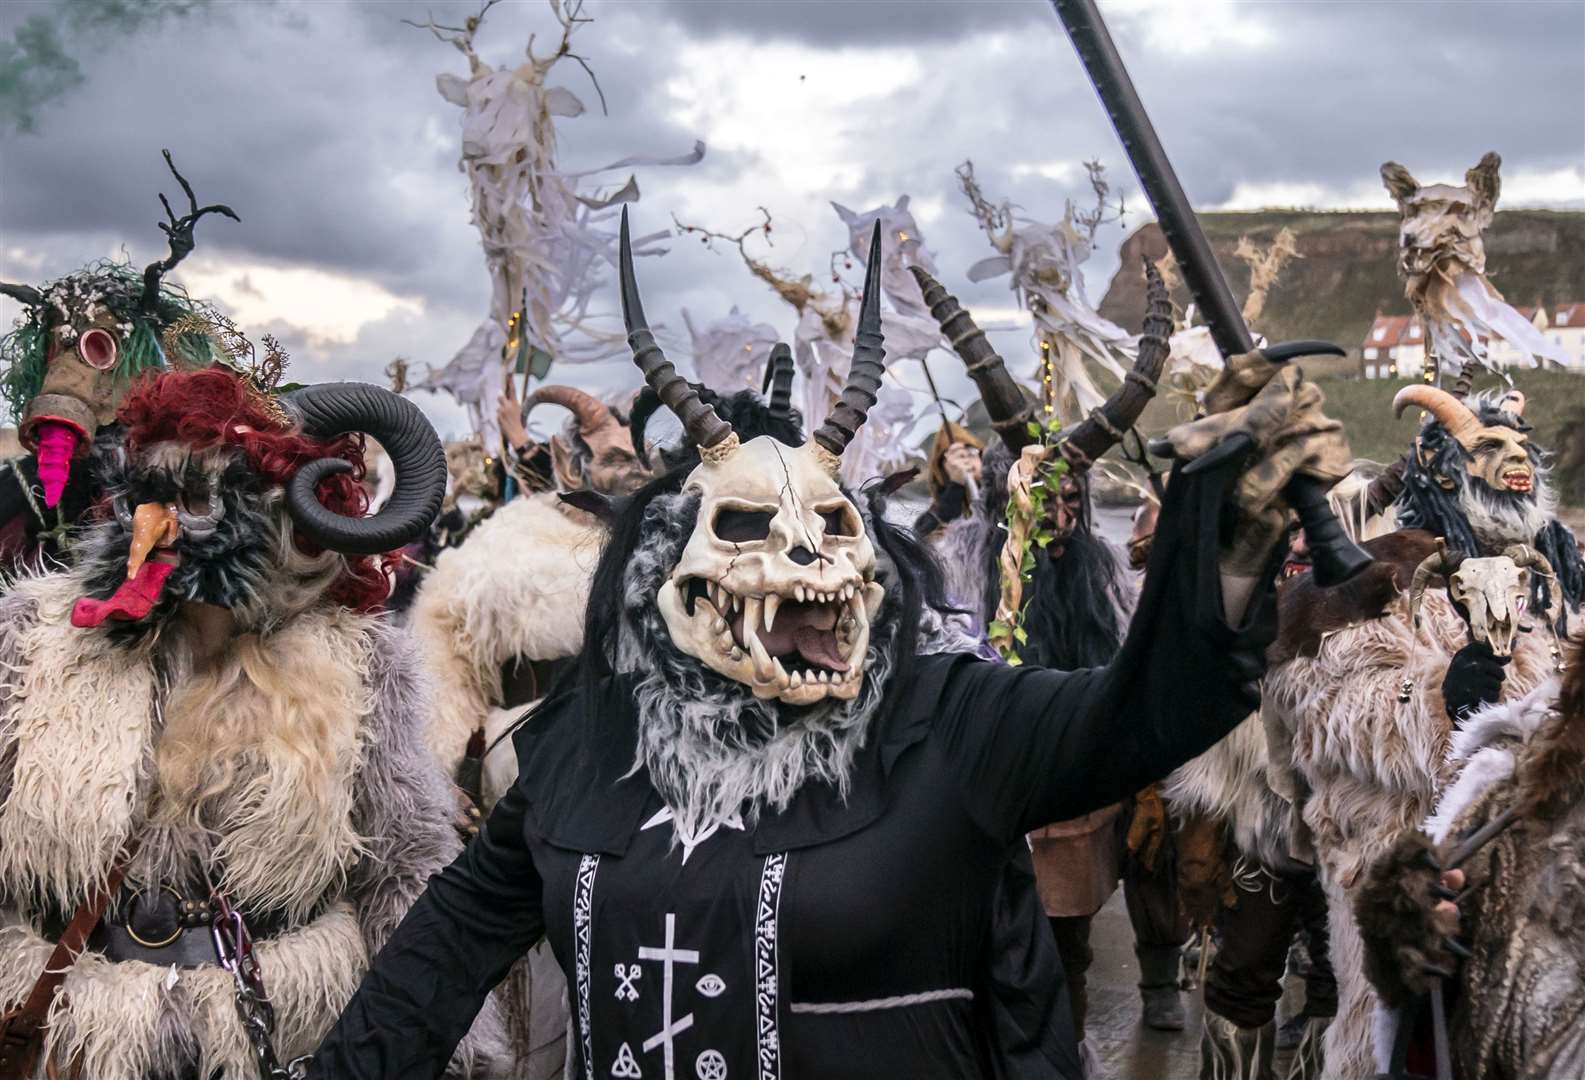 Whitby was the scene of a Krampus Run, which celebrates the Krampus, a horned creature from European folklore who accompanies Saint Nicholas on his rounds every December (Danny Lawson/PA)